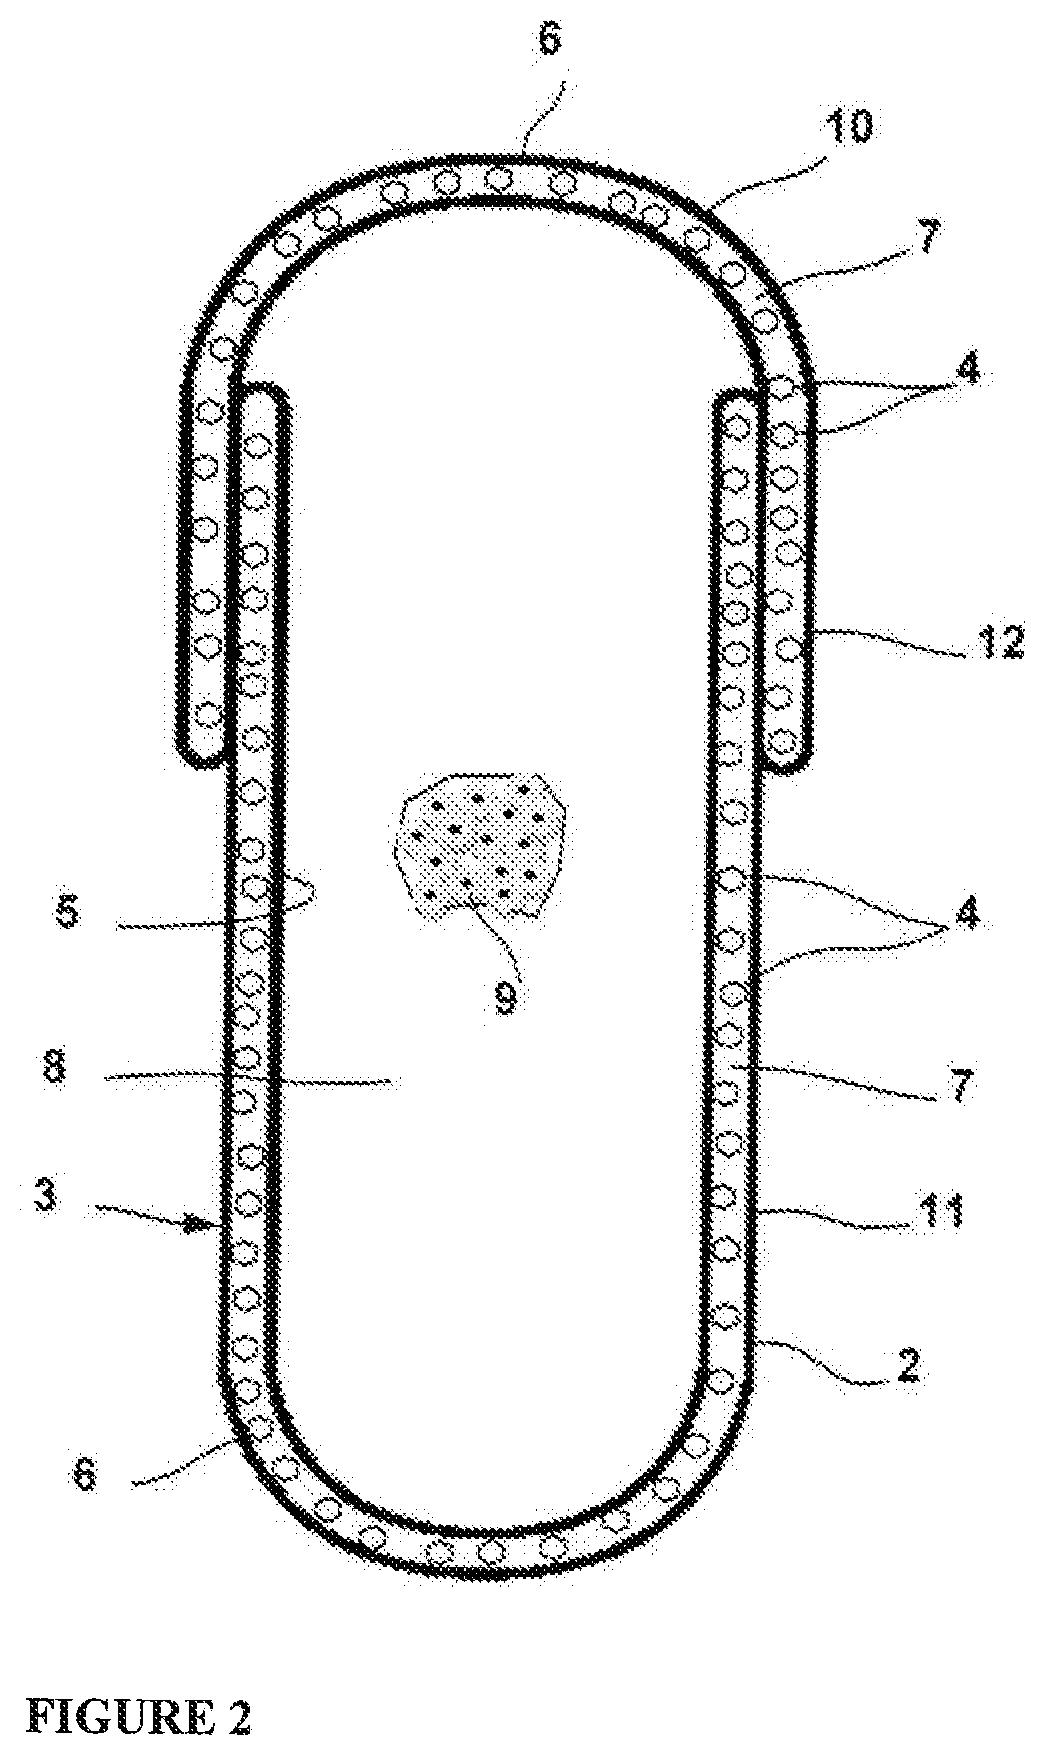 Hard Capsule Shell Compositions for the Oral Contraceptive Formulations